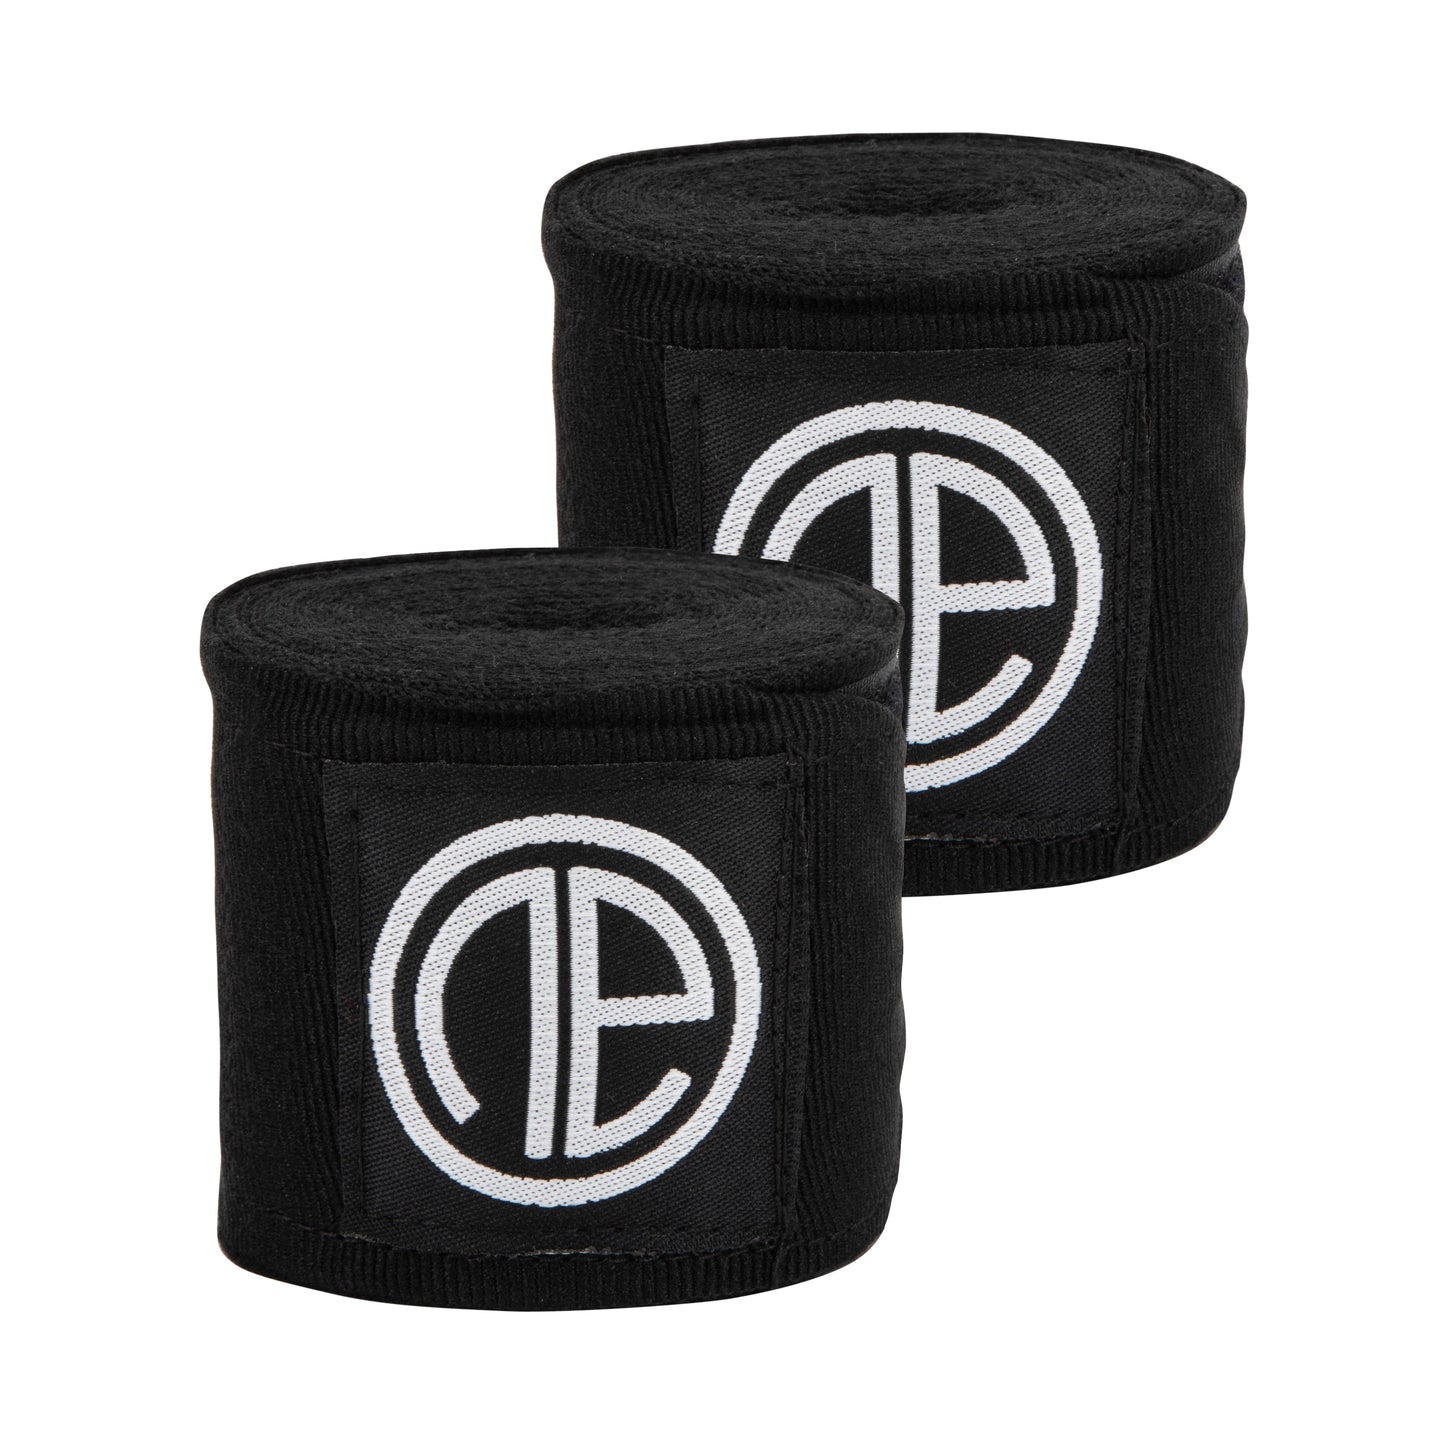 OA Mexican Style 3.5m Stretch Hand Wraps - Black